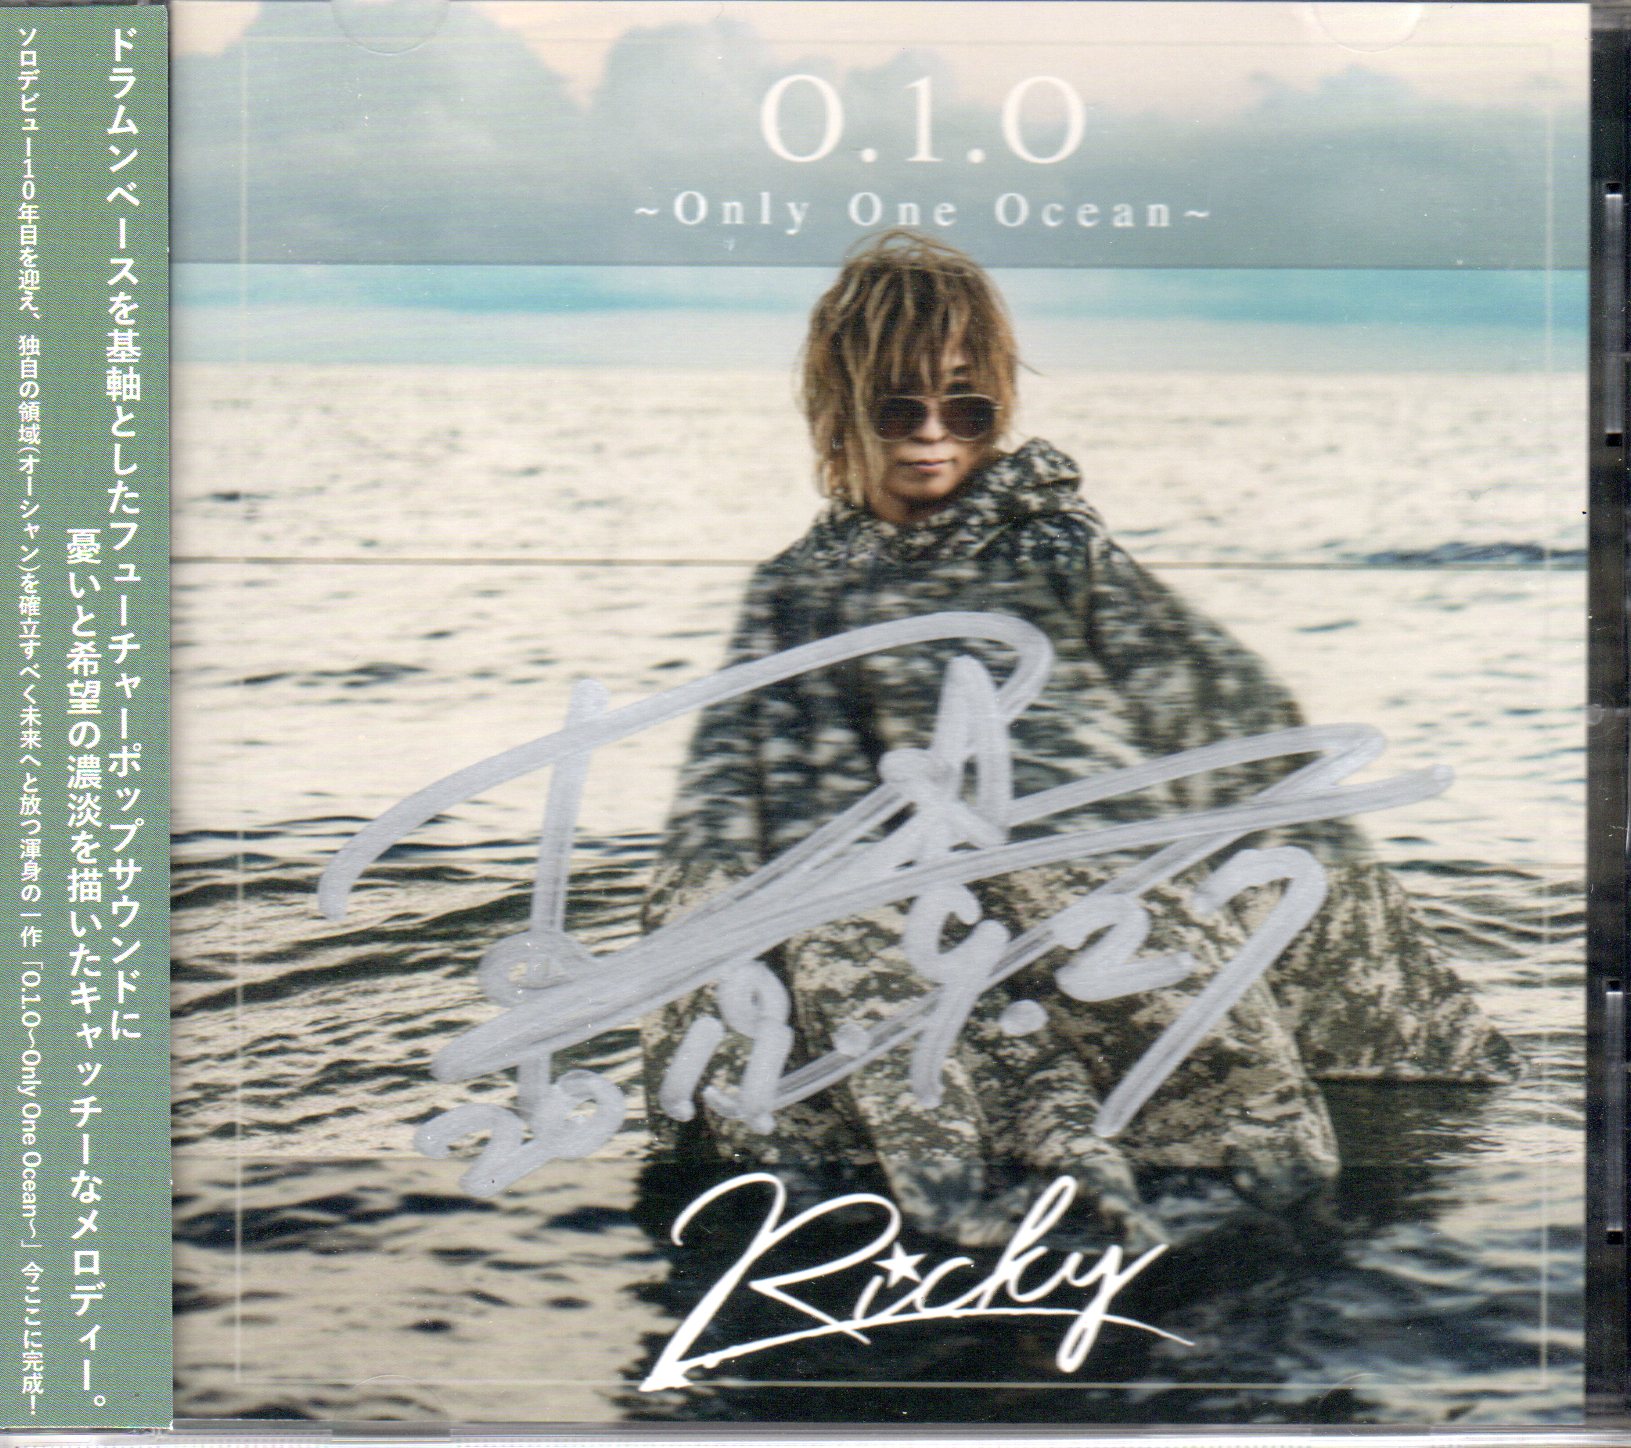 Ricky ( リッキー )  の CD 0.1.0～Only One Ocean～